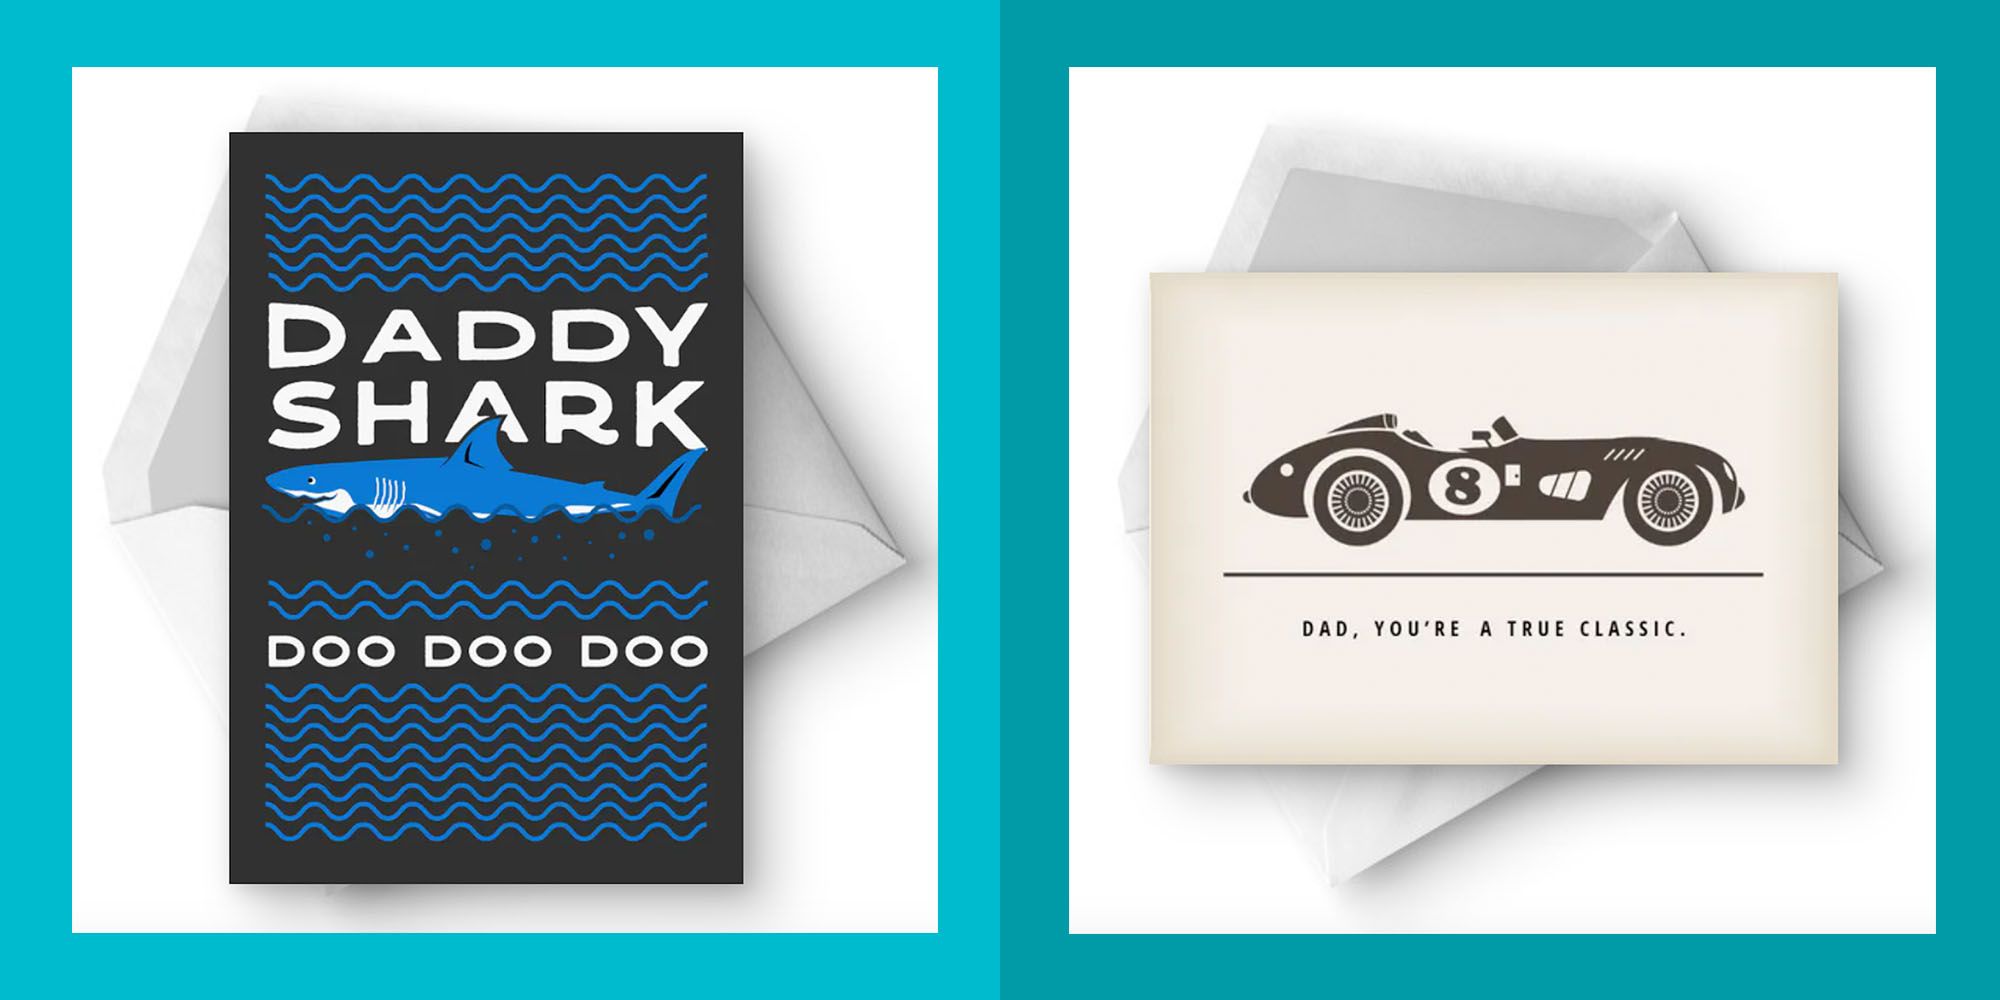 Funny Fathers day Card Humorous Birthday Card granddad Best Dad Cards father Happy fathers day cards for dad